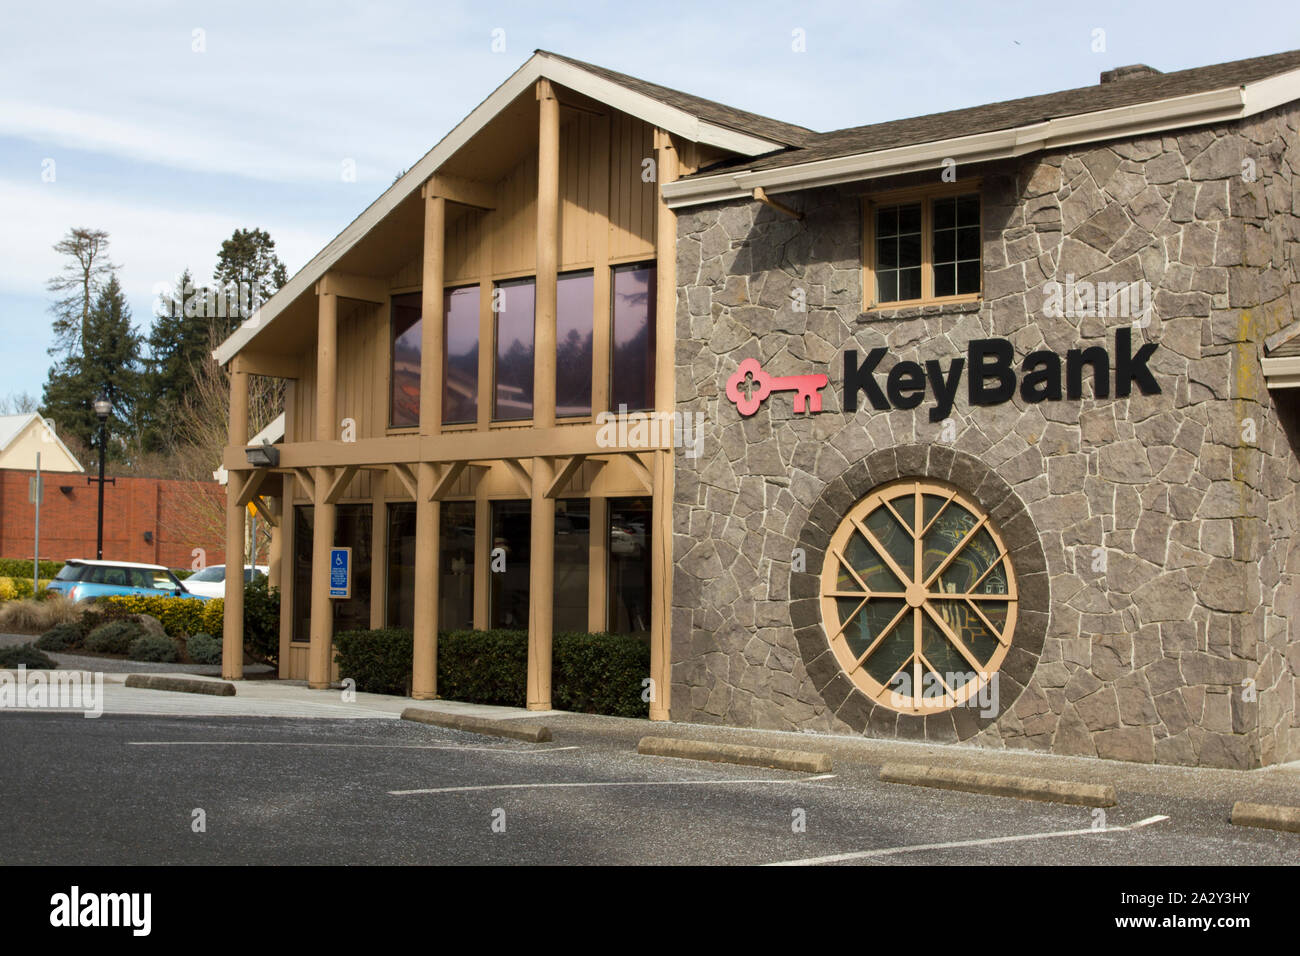 West Linn, OR - Mar 5, 2019: The exterior of a KeyBank branch. KeyBank, the primary subsidiary of KeyCorp, is a regional bank headquartered in Ohio. Stock Photo